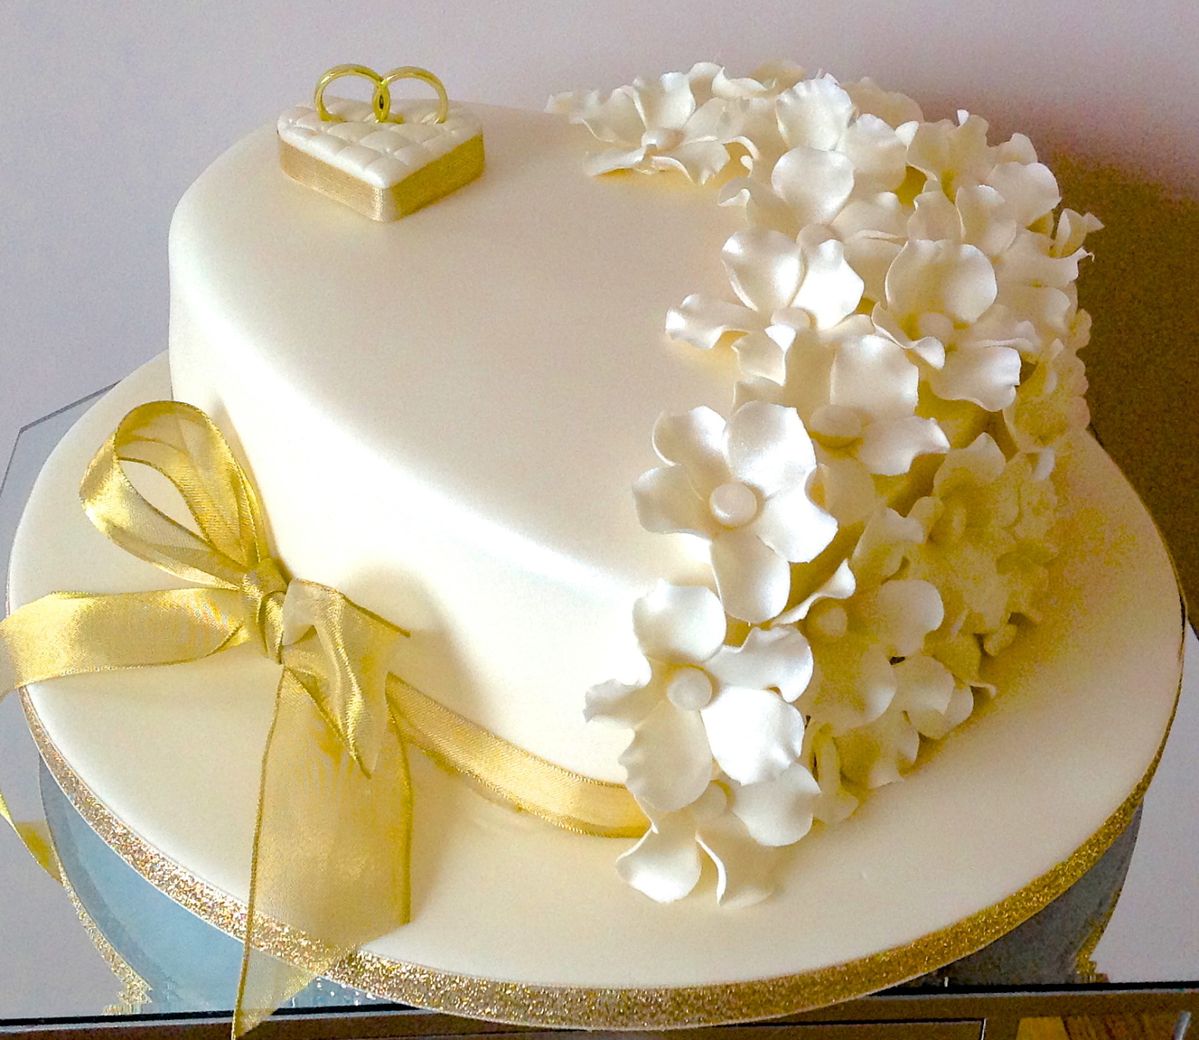 The Prettiest Pearl Wedding Cakes - hitched.co.uk - hitched.co.uk